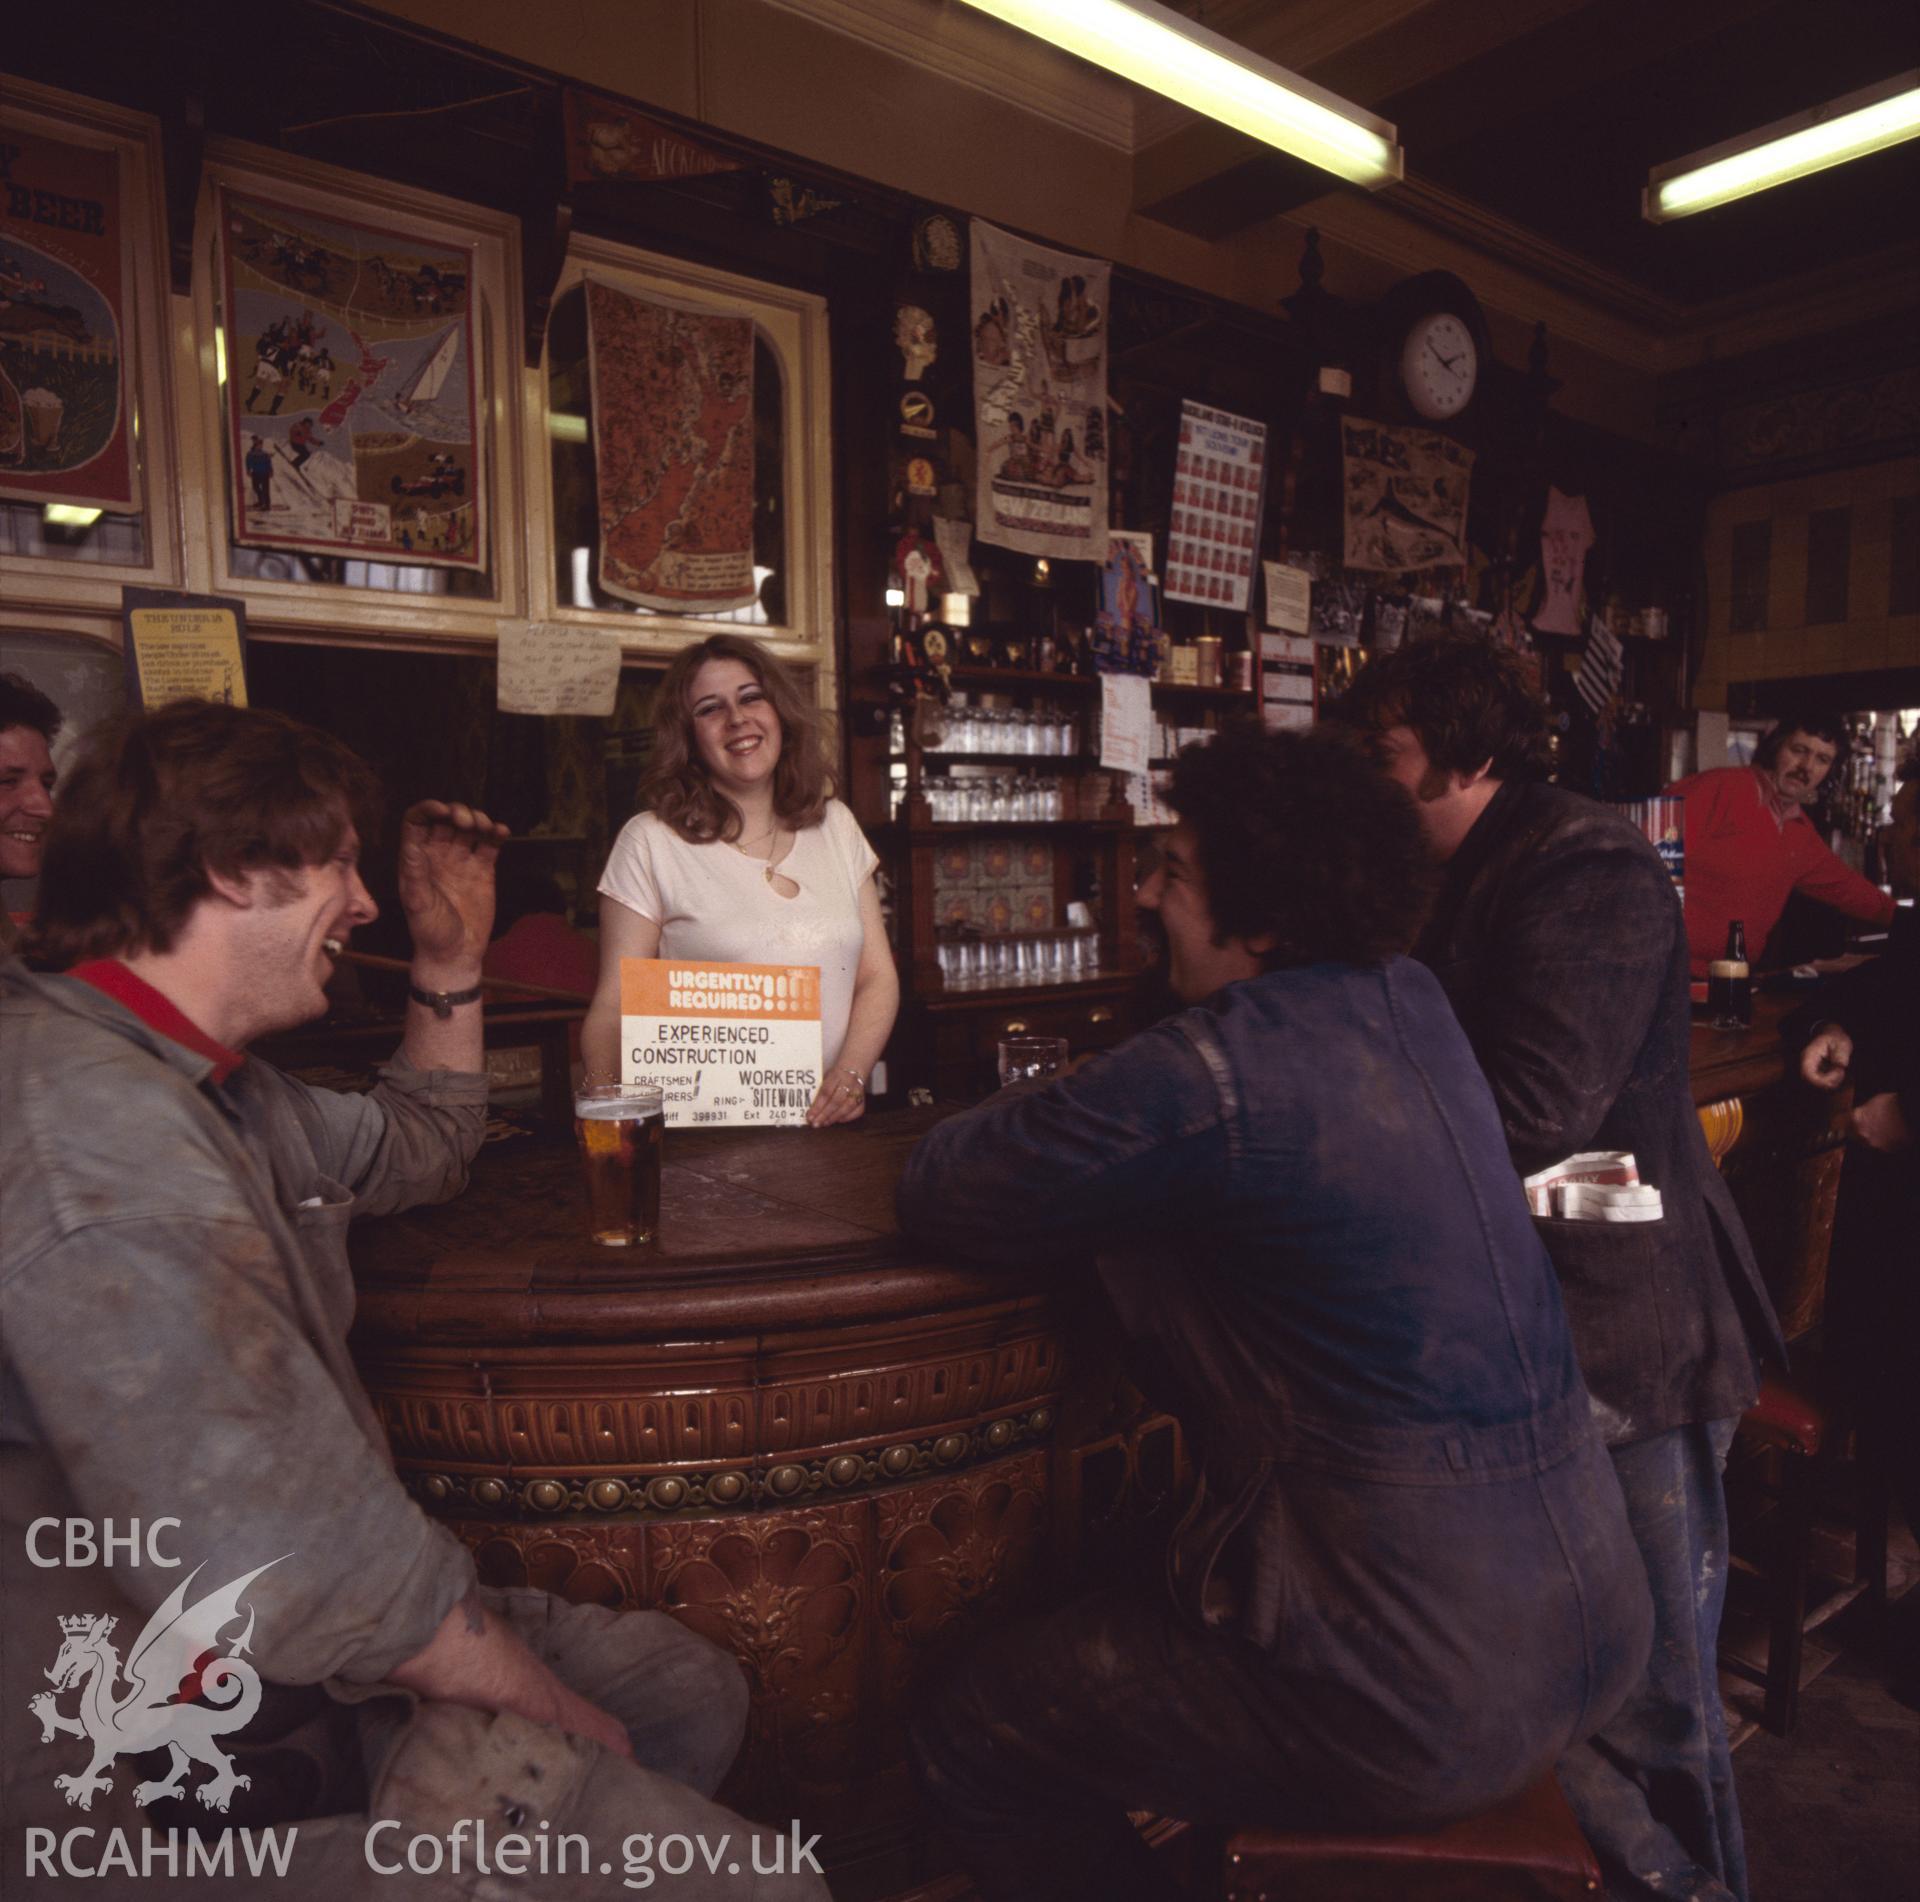 1 colour transparency showing interior view of Golden Cross Inn with figures; Butetown, Cardiff; collated by the former Central Office of Information.